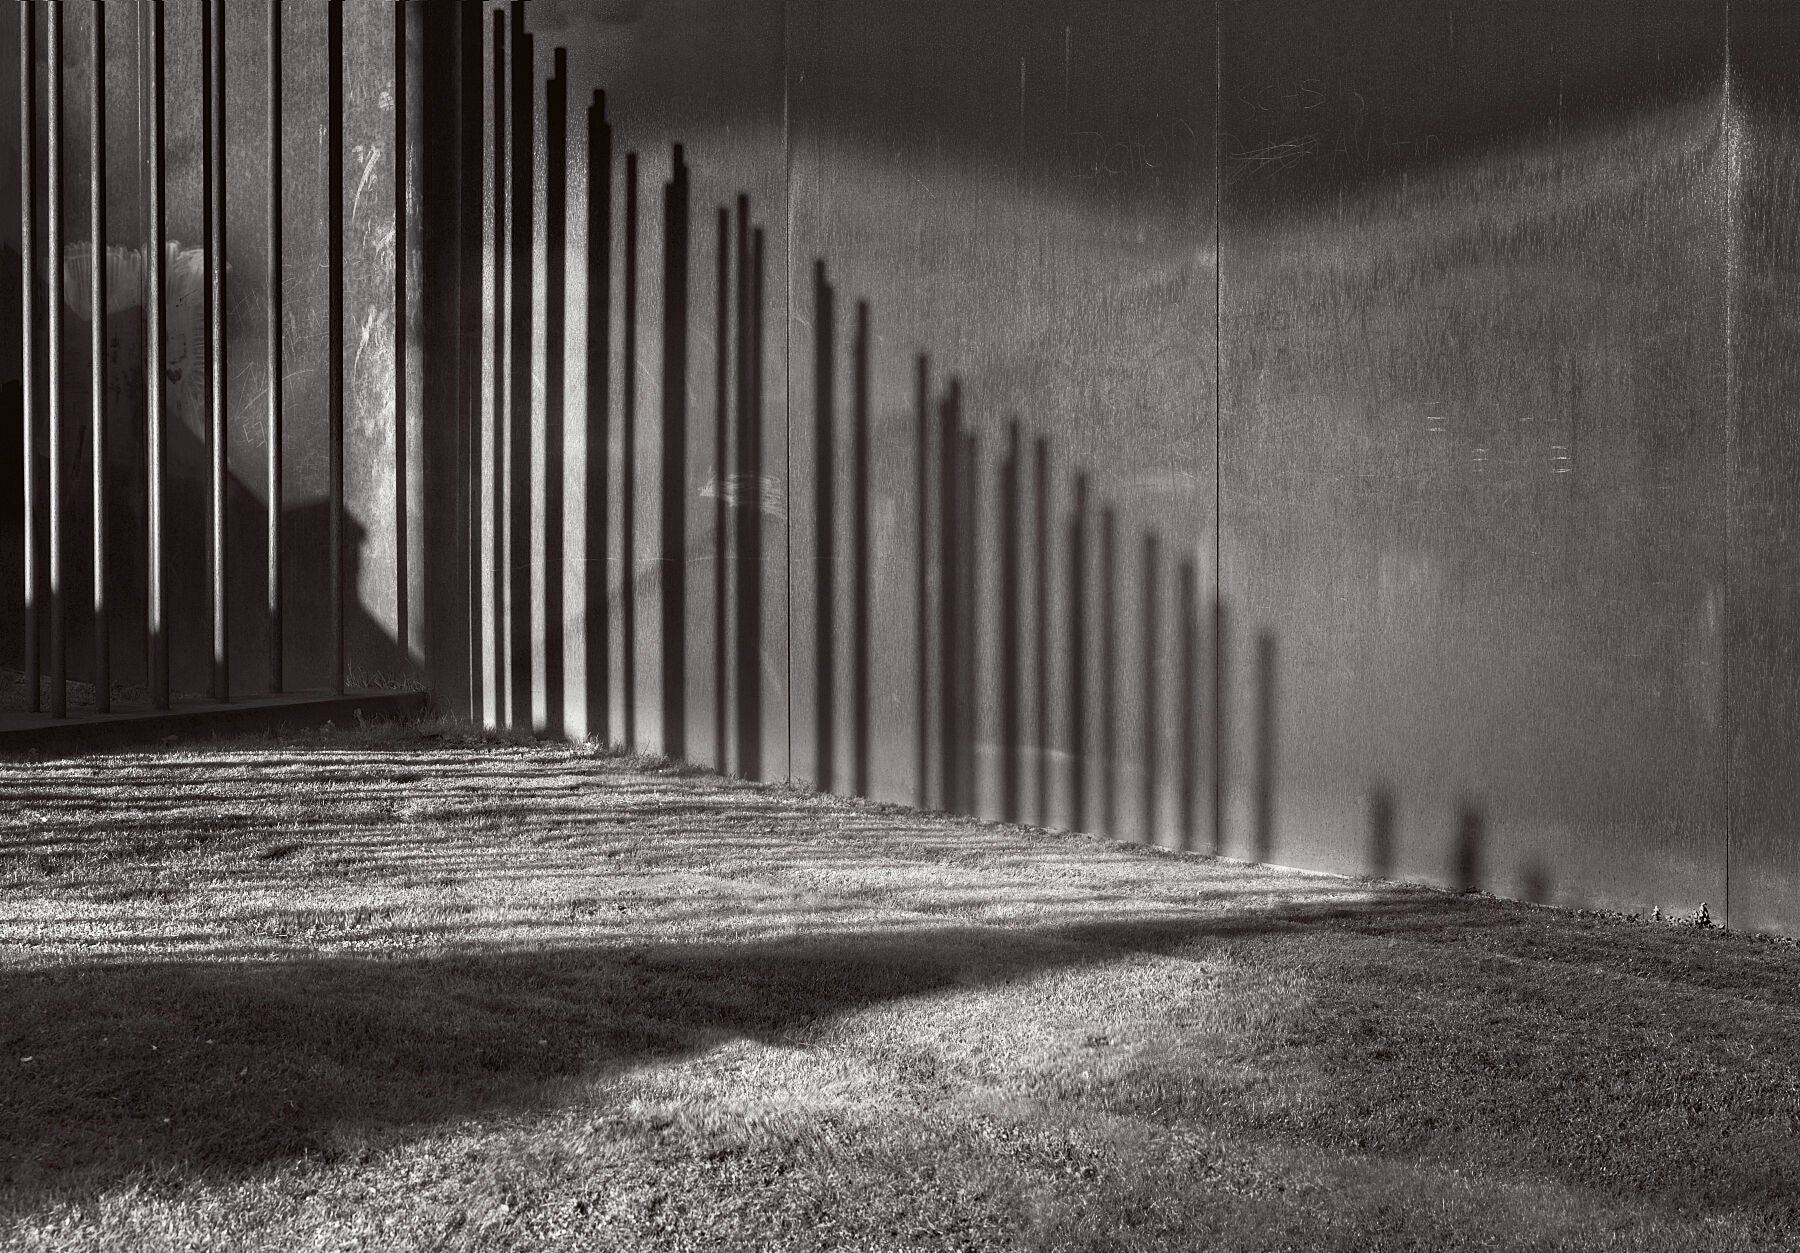 Beyond the Wall - Berlin Wall Memorial - Horizon - bw - Untitled_Panorama1 Flaty-cov1PSD finals001-bw - Giclee Hahnemuhle Photorag